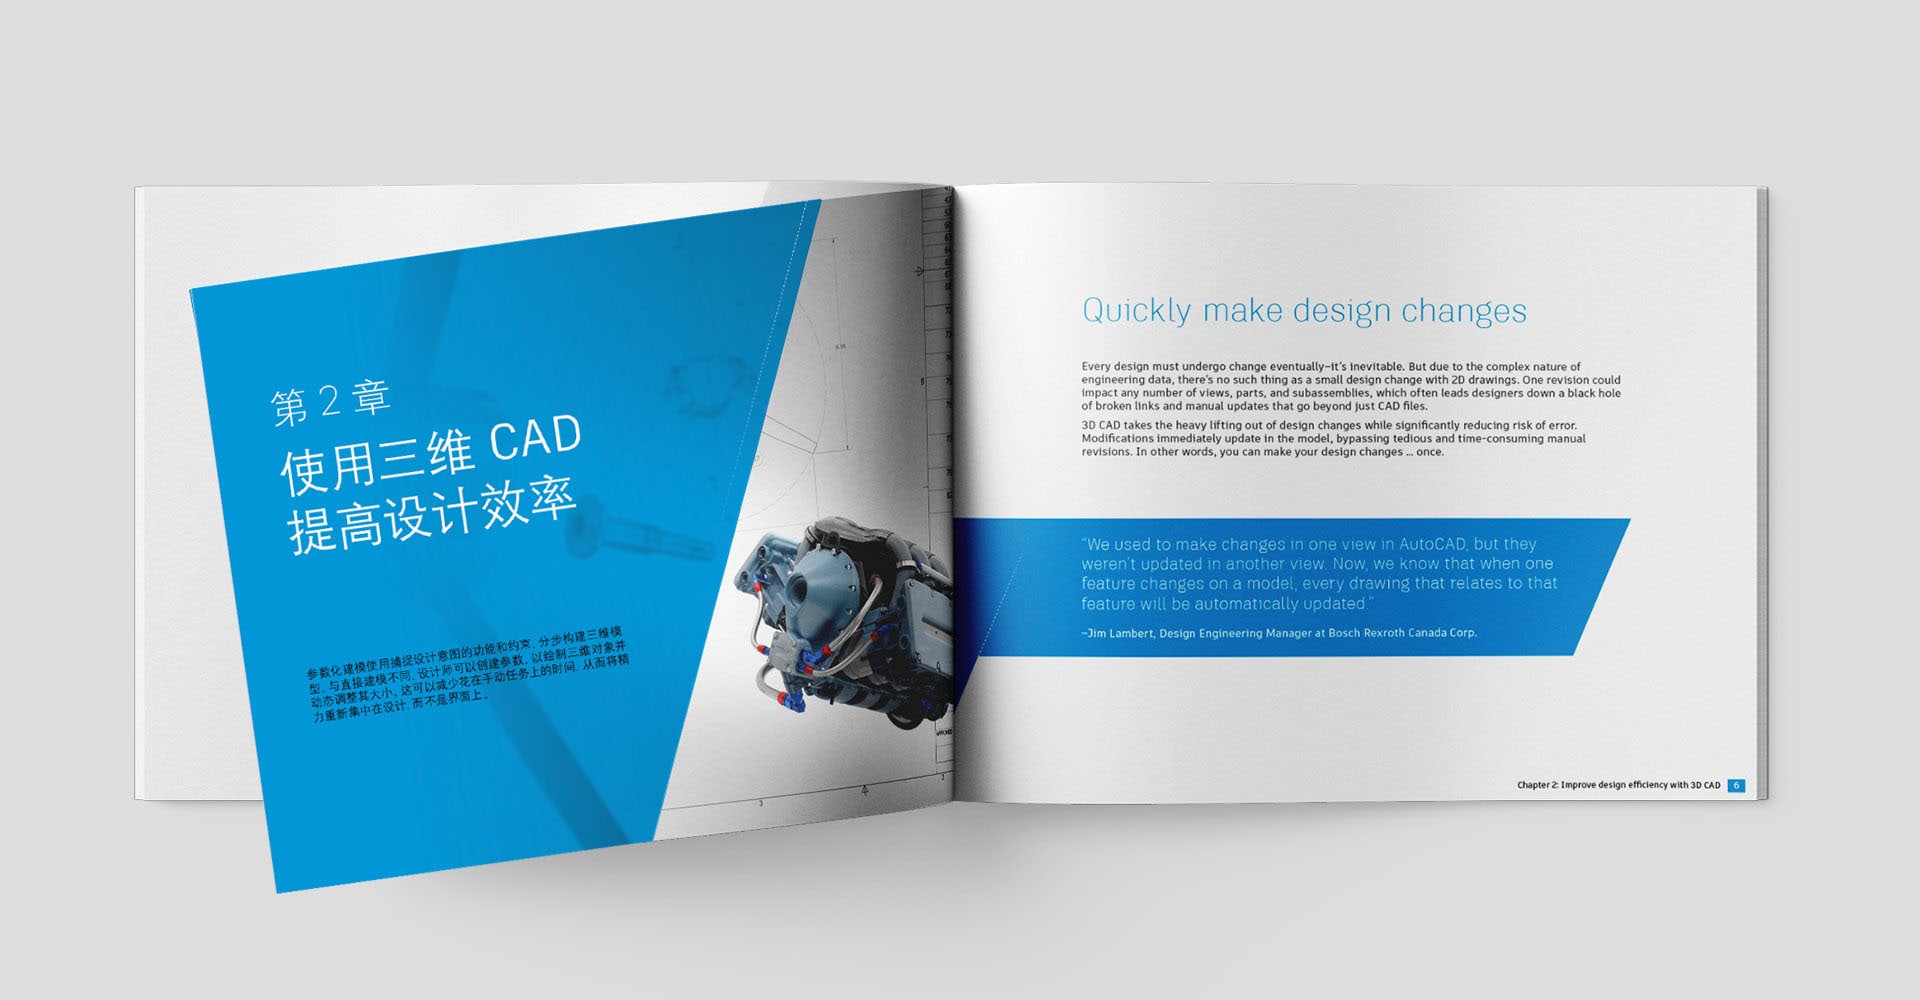 Essentials of 3D CAD for 2D users e-book